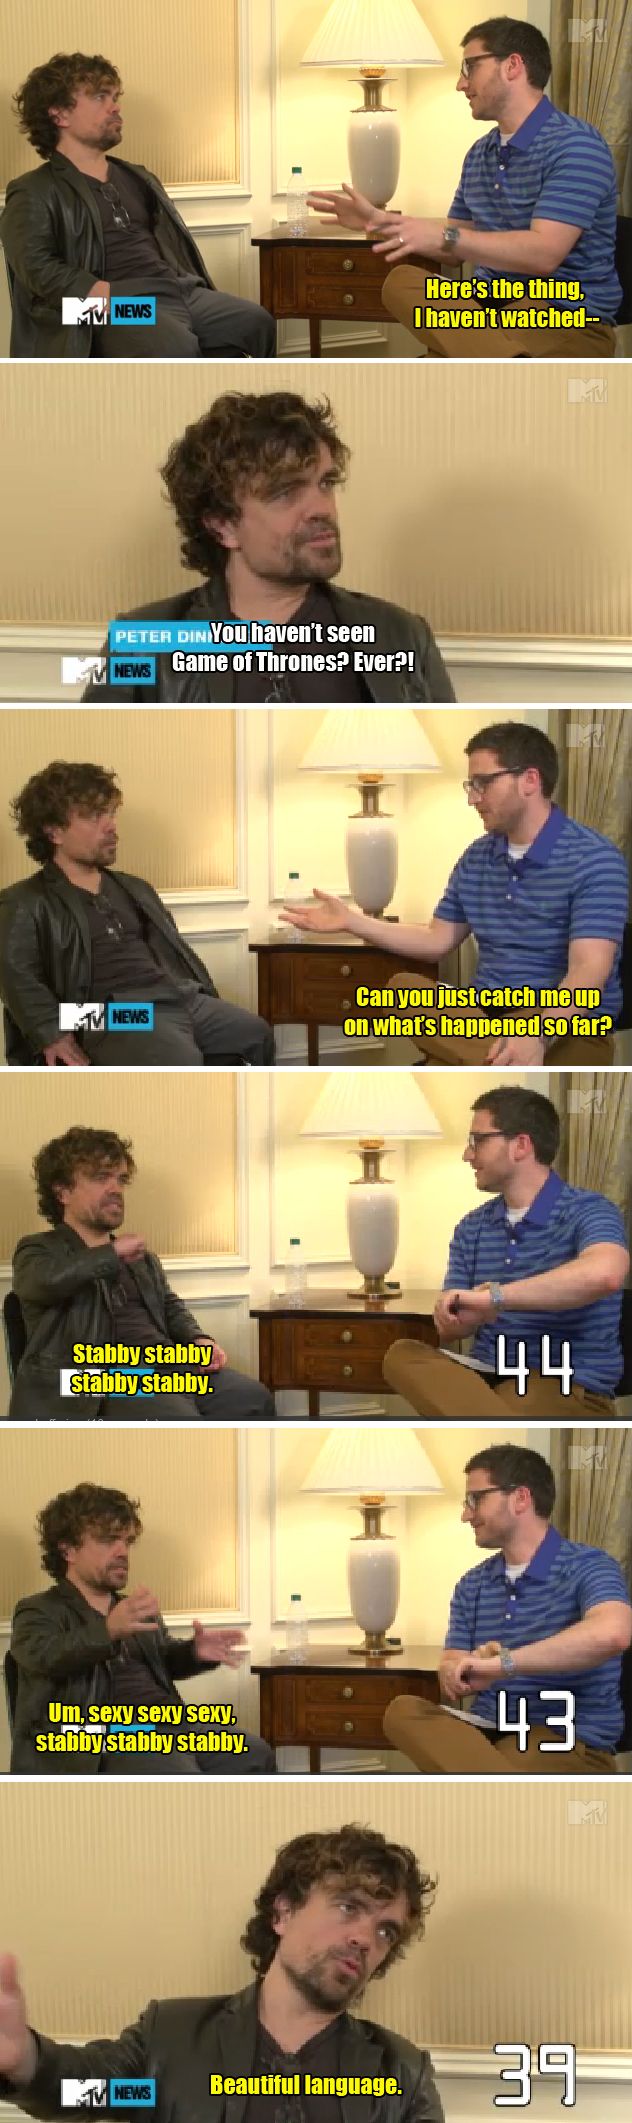 Peter Dinklage catches you up on The Game of Thrones